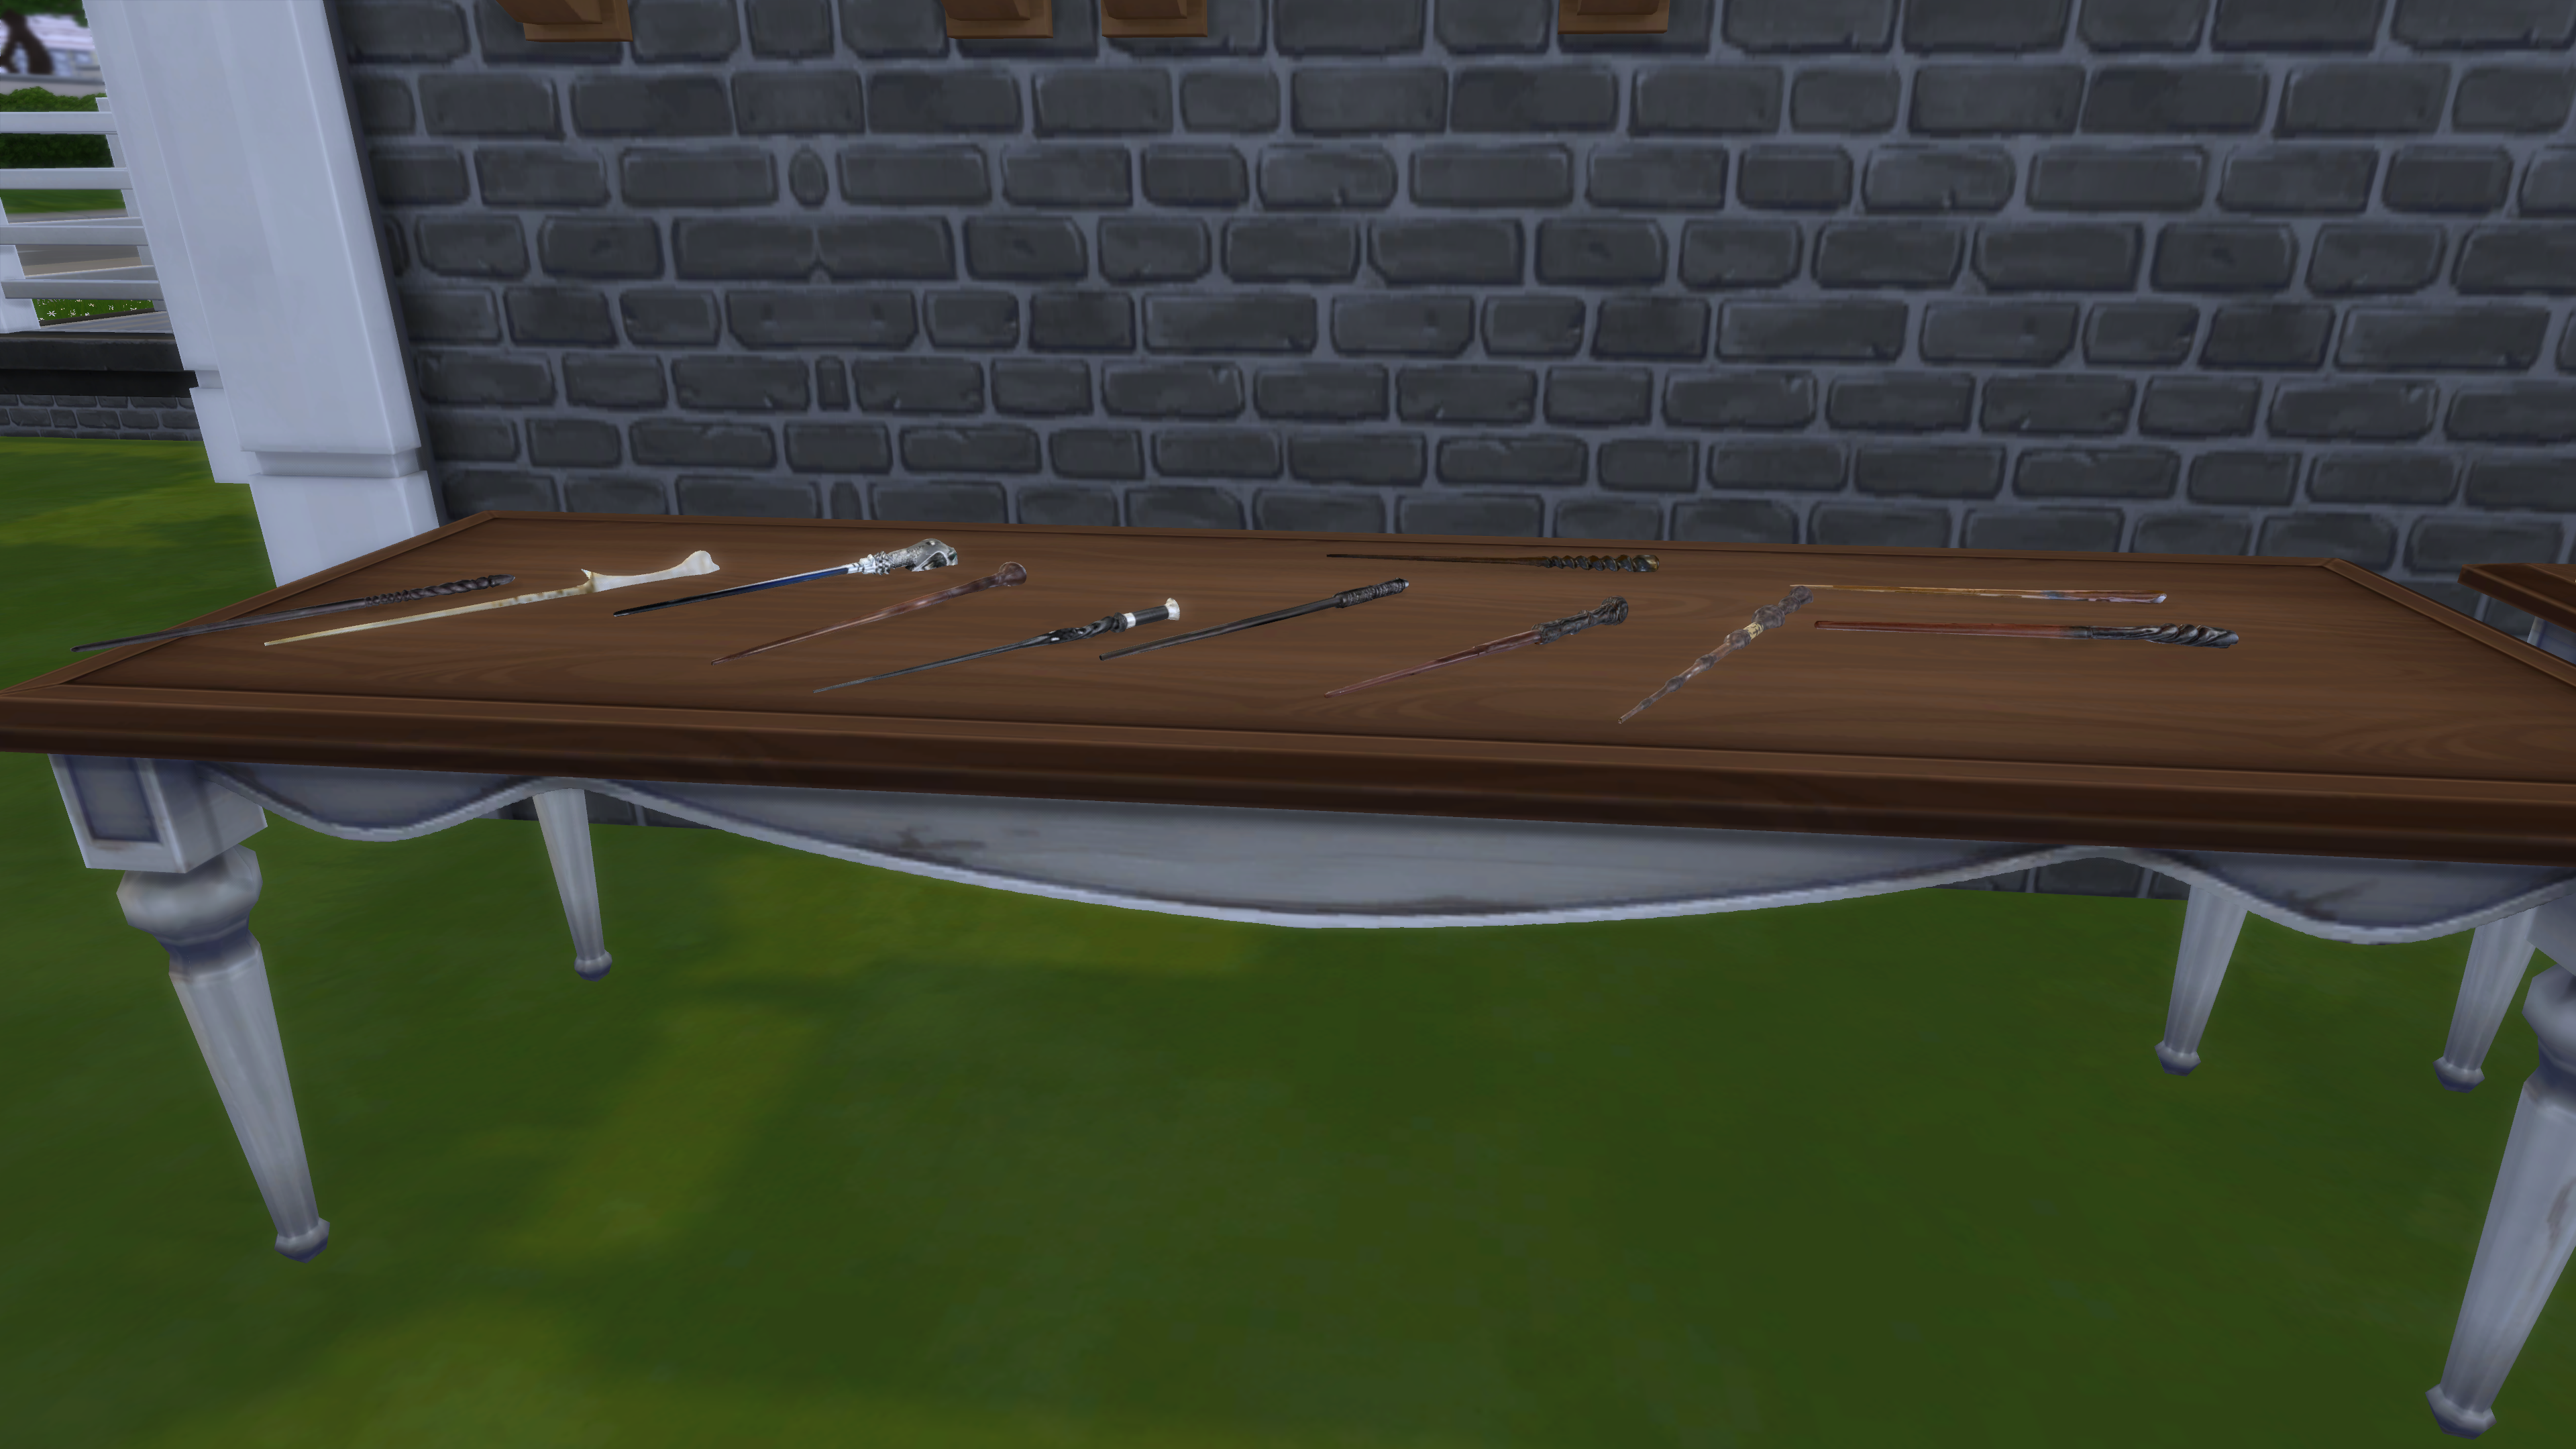 Wands laid nicely on a table. 